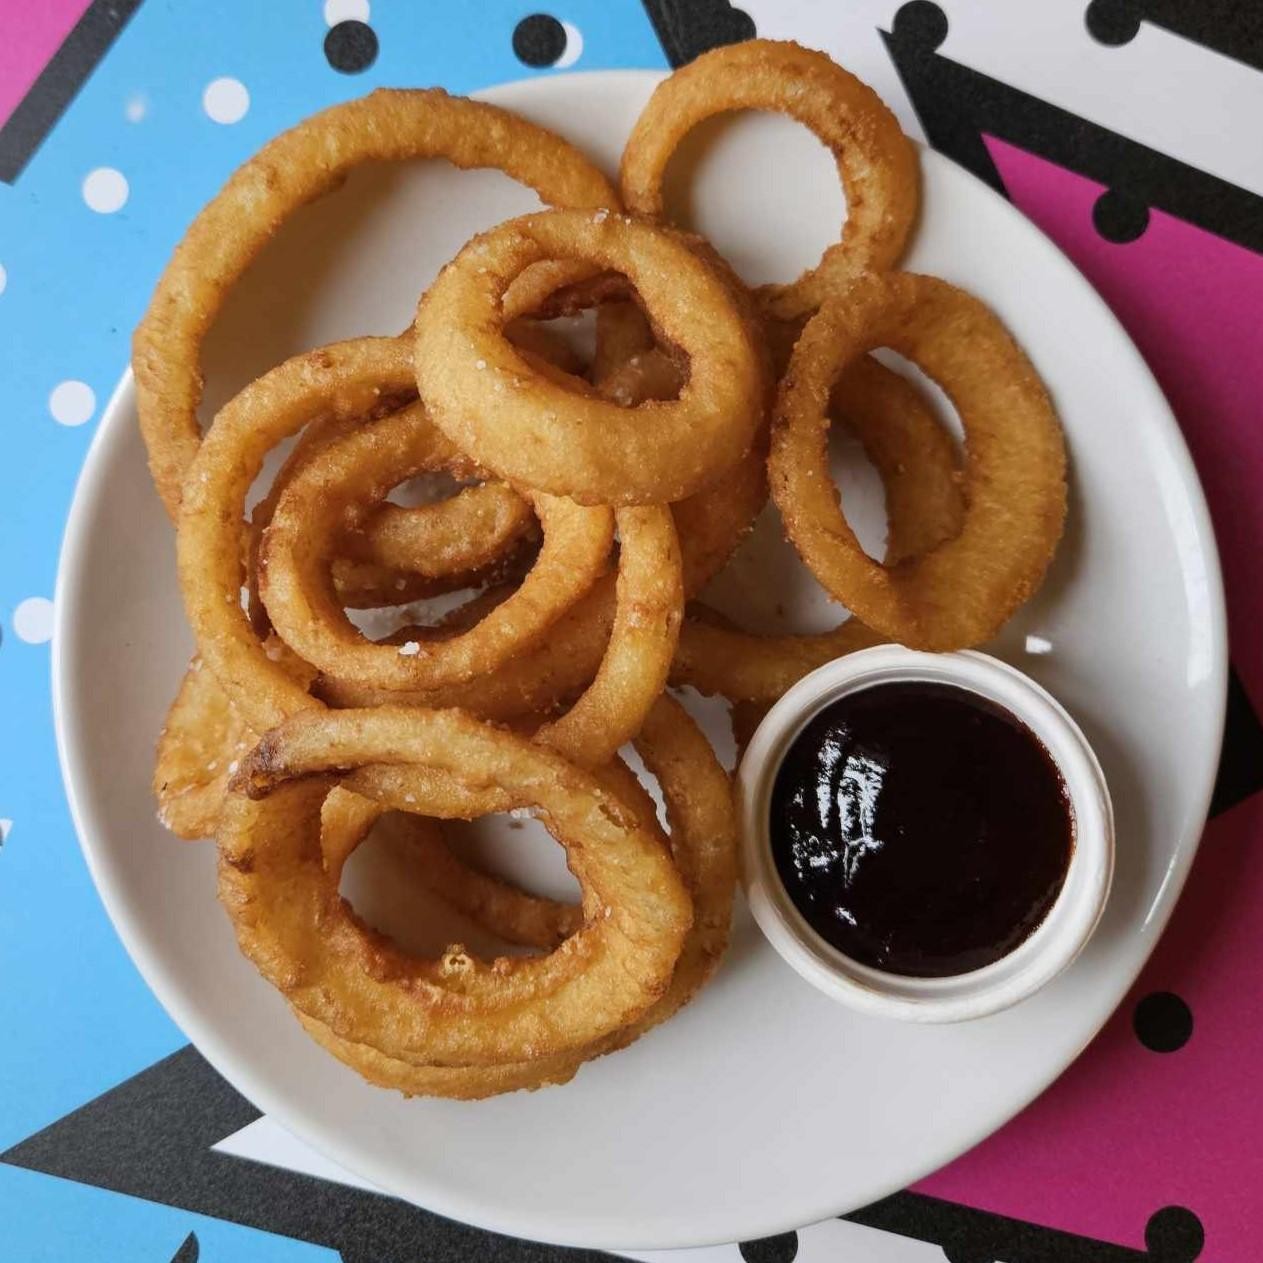 Battered Onion Rings - Fried Crispy served with Honey Bourbon BBQ